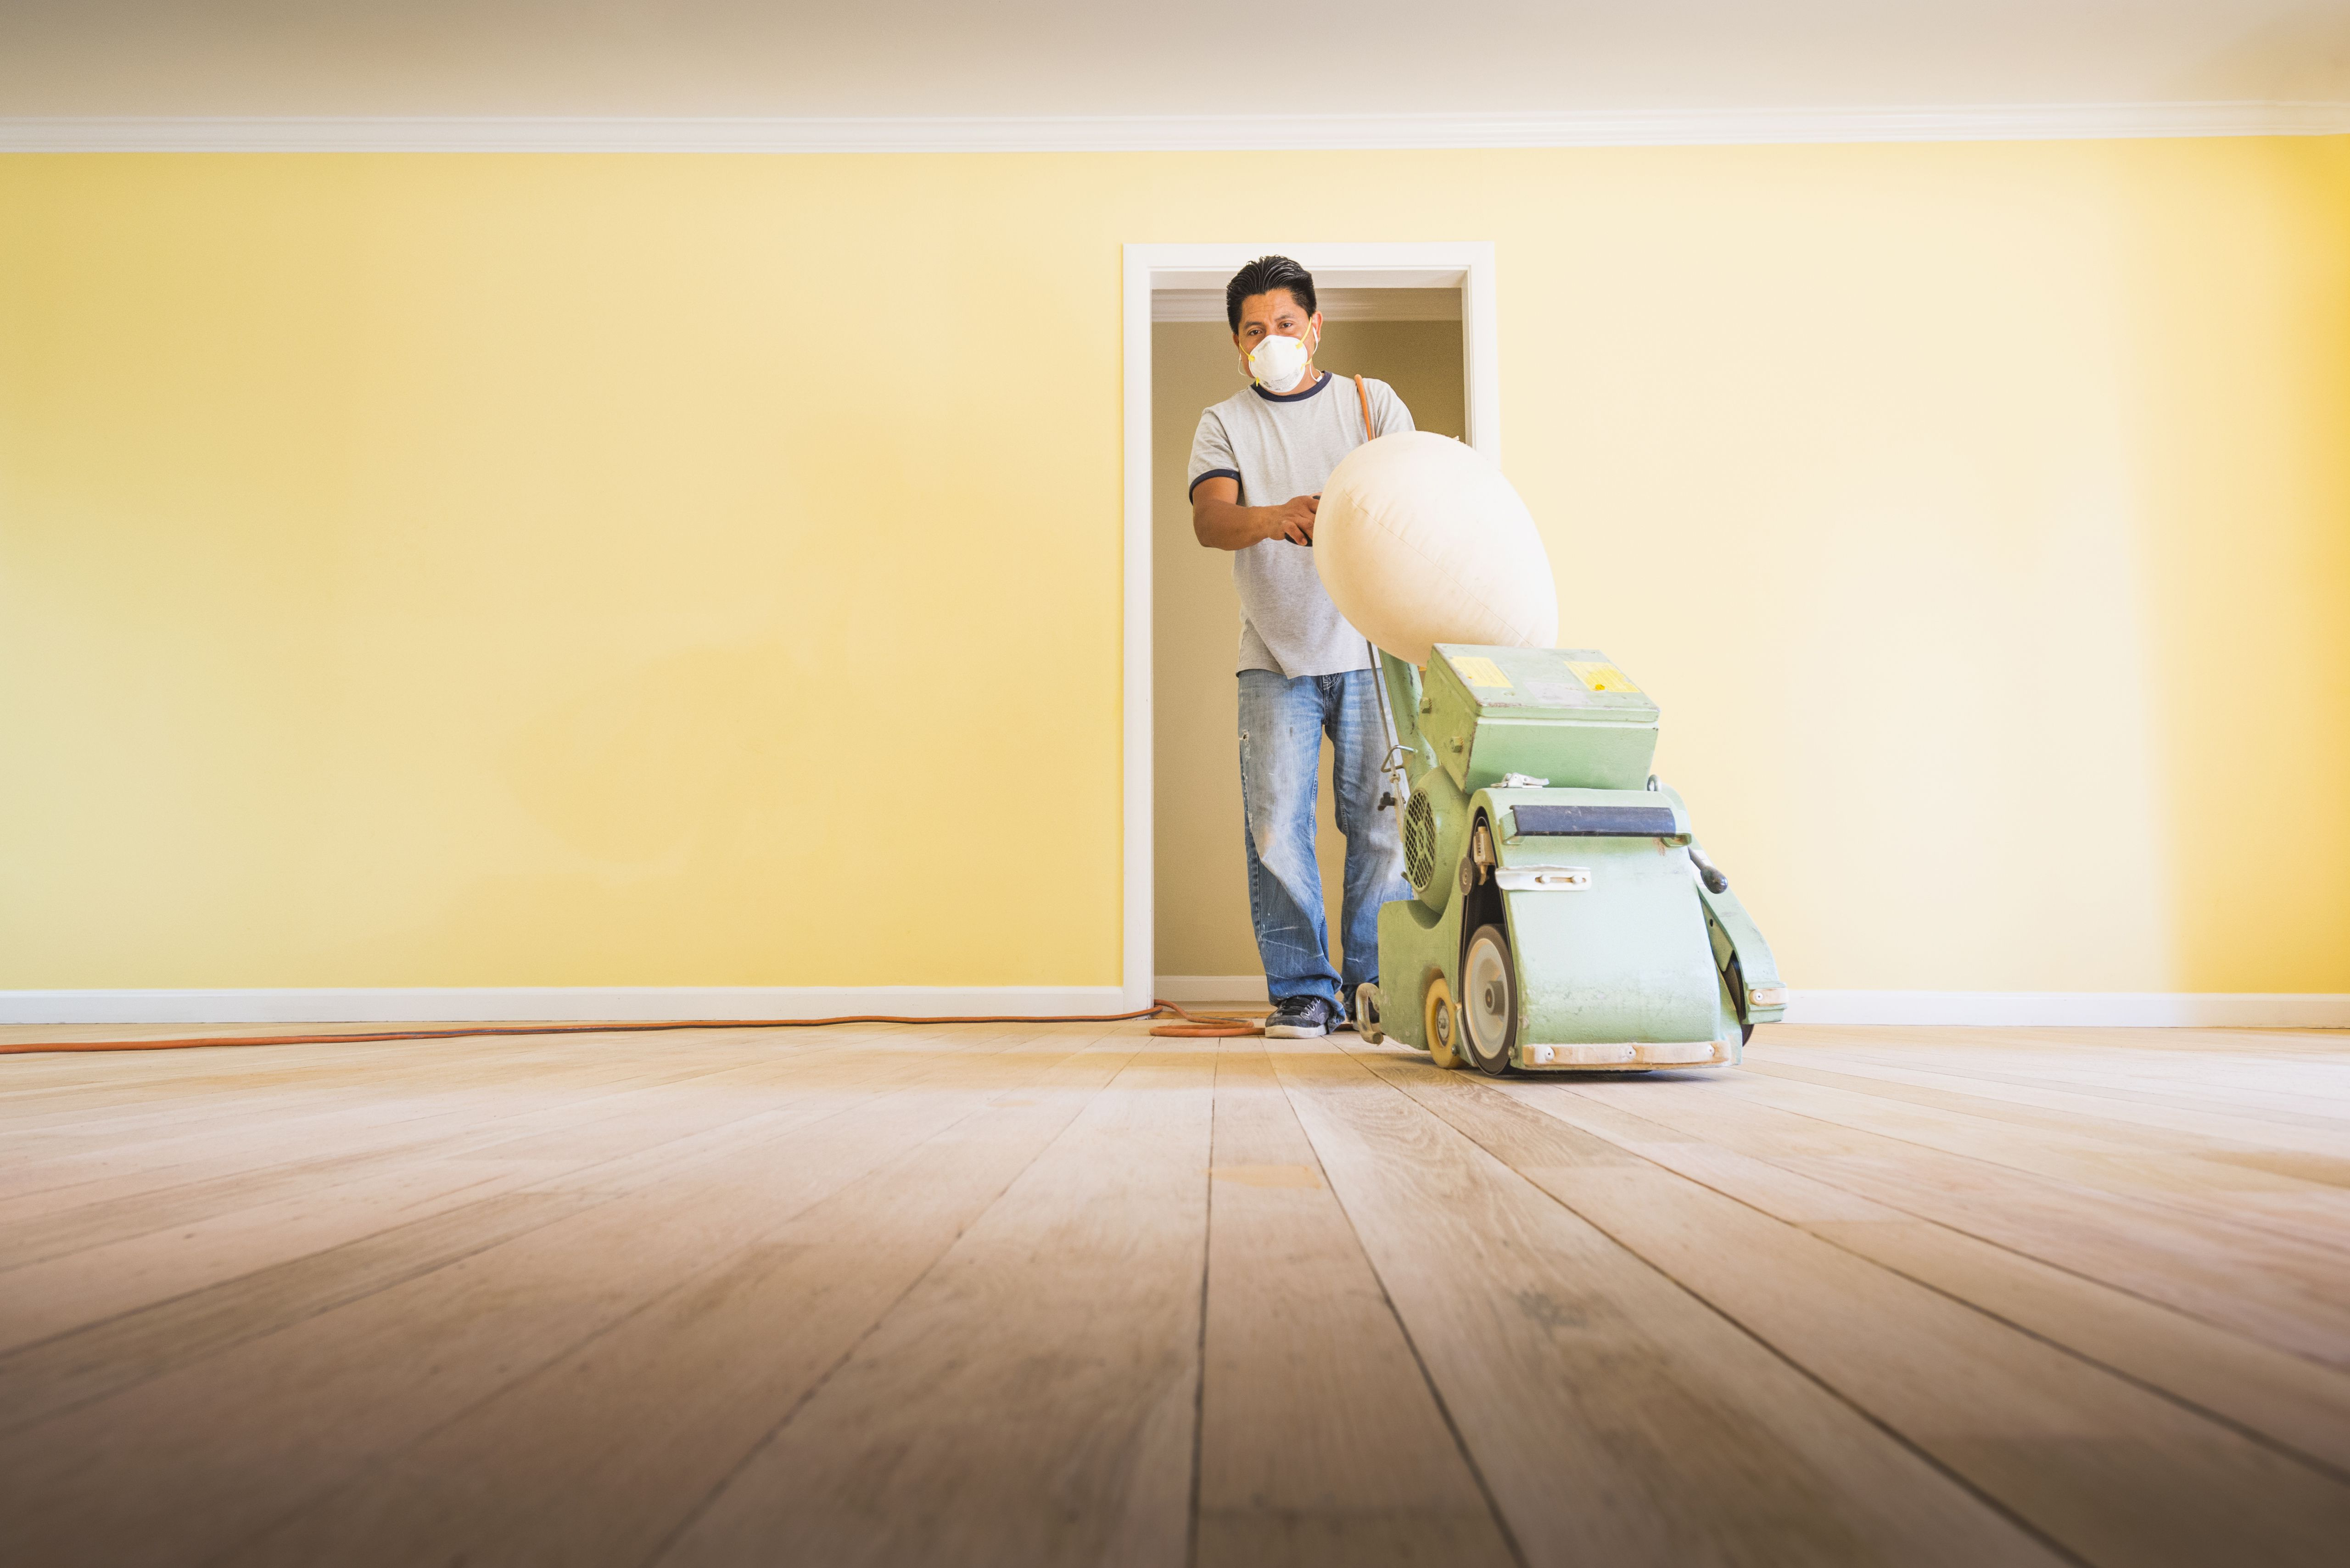 11 Stylish How Much Does Refinishing A Hardwood Floor Cost 2024 free download how much does refinishing a hardwood floor cost of should you paint walls or refinish floors first throughout floorsandingafterpainting 5a8f08dfae9ab80037d9d878